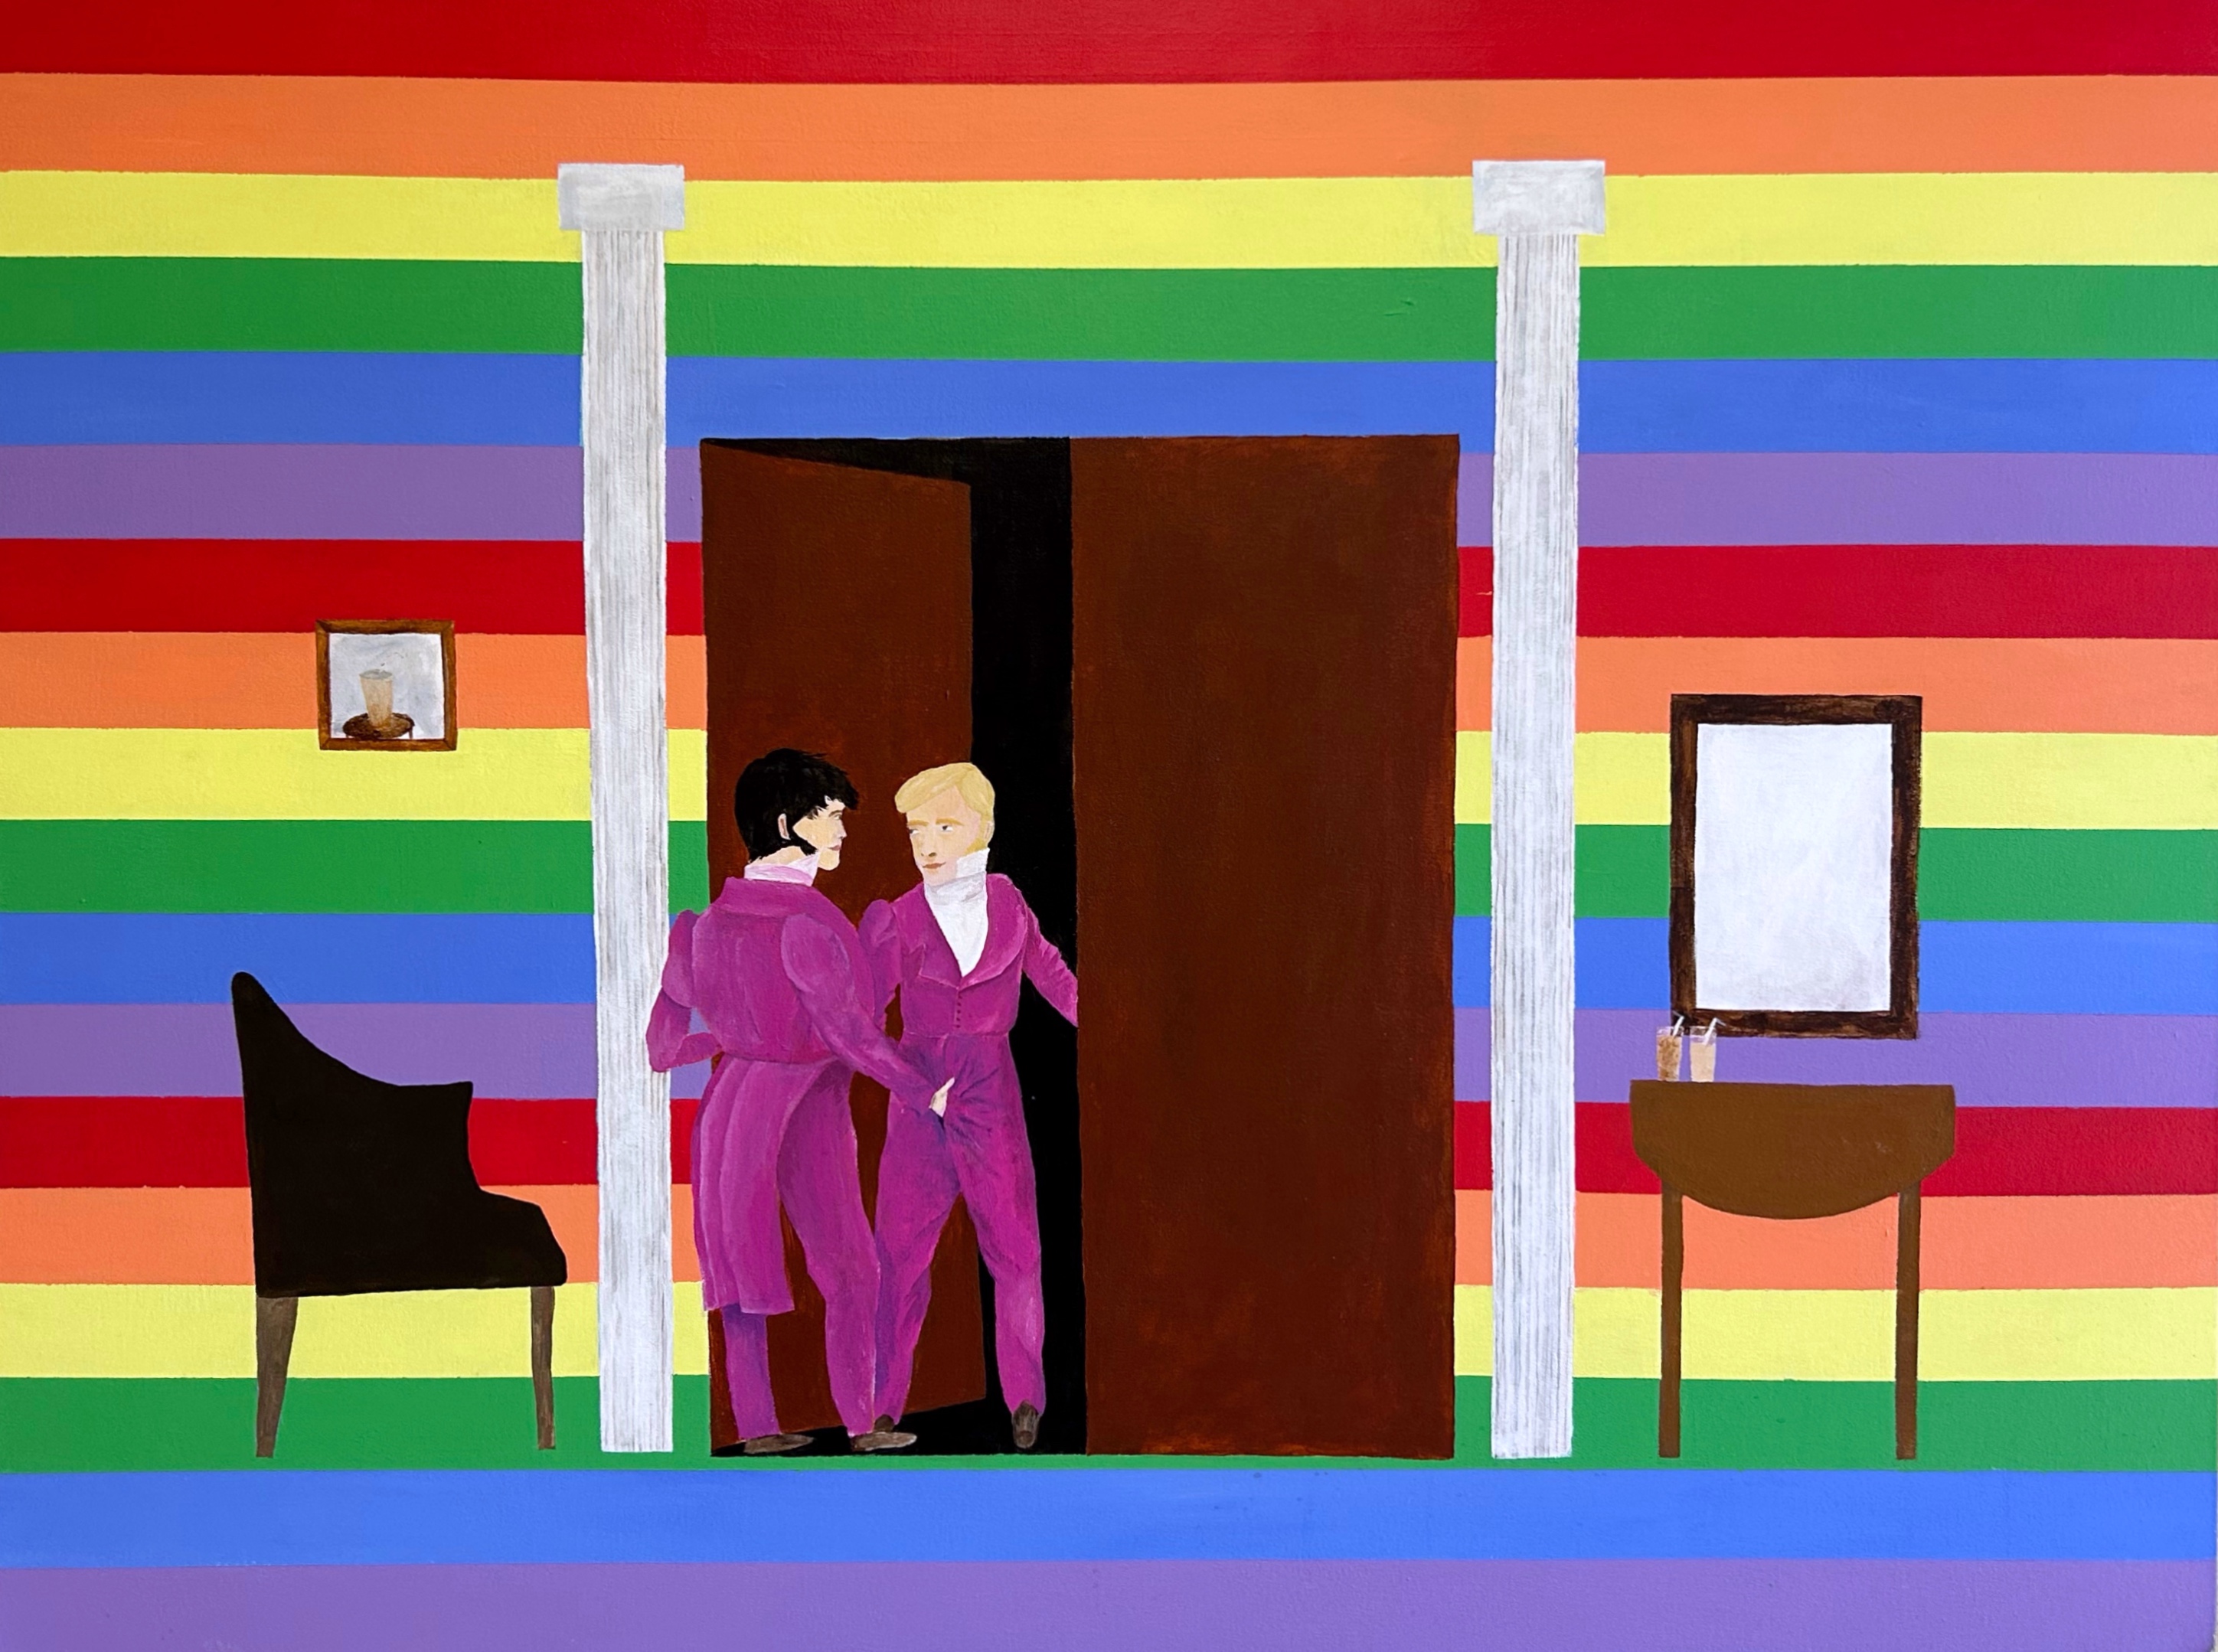 Two men in pink suits are entering a dark doorway. One man is reaching into the pants of the other. The doorway is against a striped rainbow background. There are two white columns on either side of the doors. To the right of the doorway there is a small table with two iced coffees and a framed mirror or blank image above the table. On the other side of the door, there is a chair and above that there is a framed image of an iced coffee.